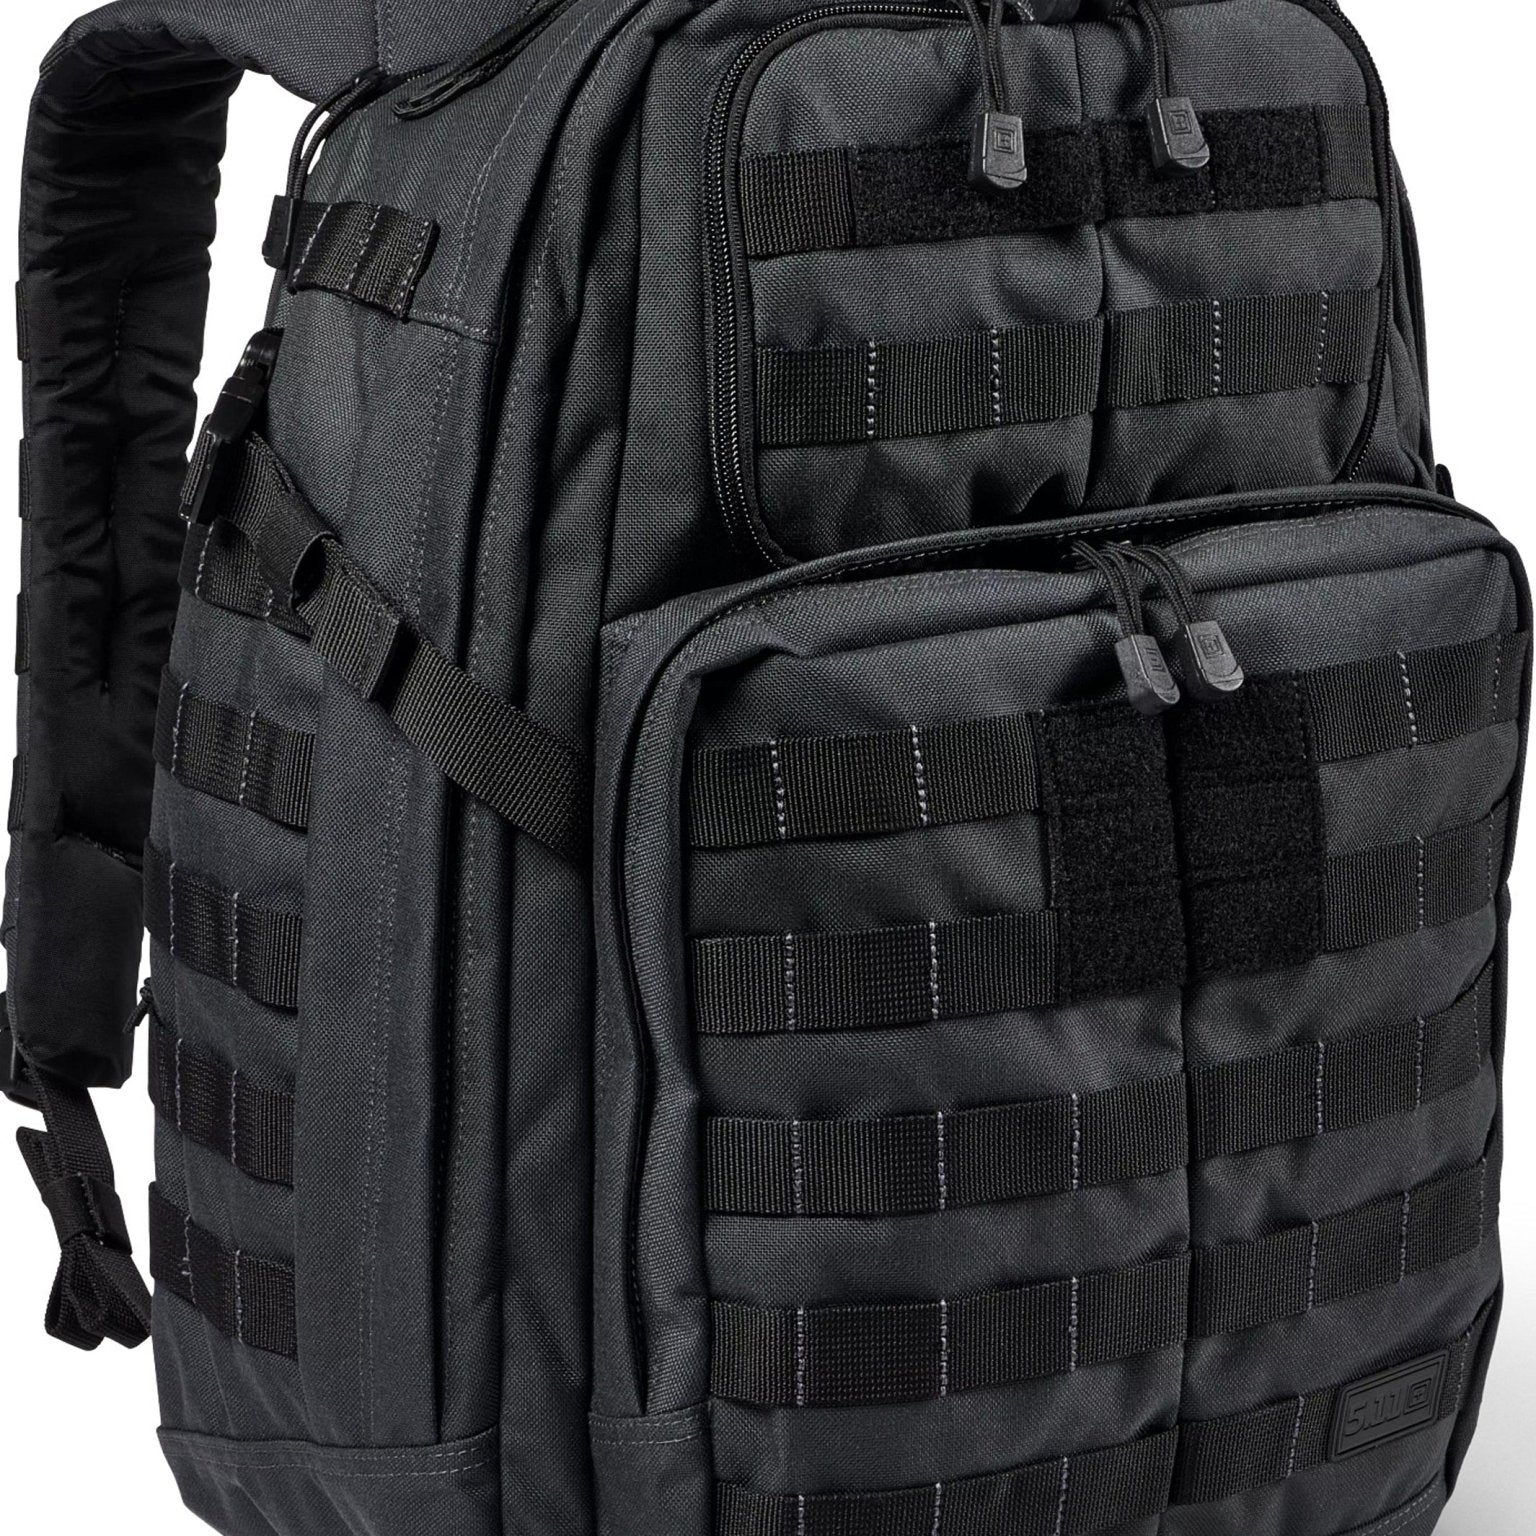 4elementsclothing5.11 Tactical5.11 Tactical - 5.11 Tactical Rush 24 2.0 Backpack - Style 56563Bag56563-026